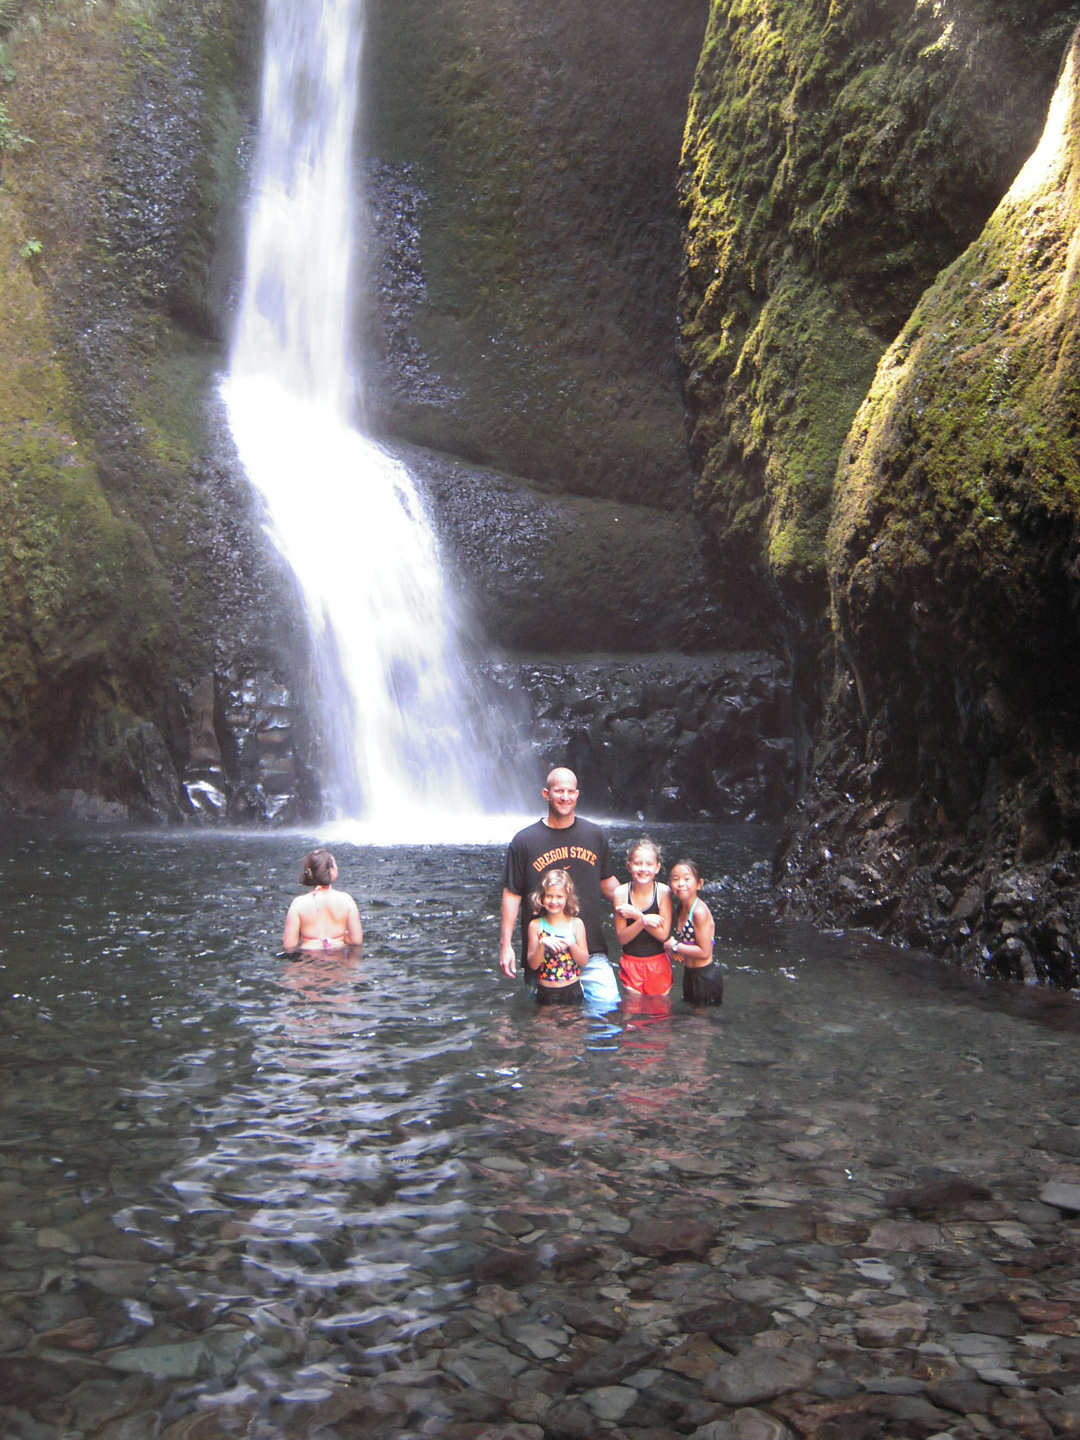 Little ones and Dad braving the cold Falls water.